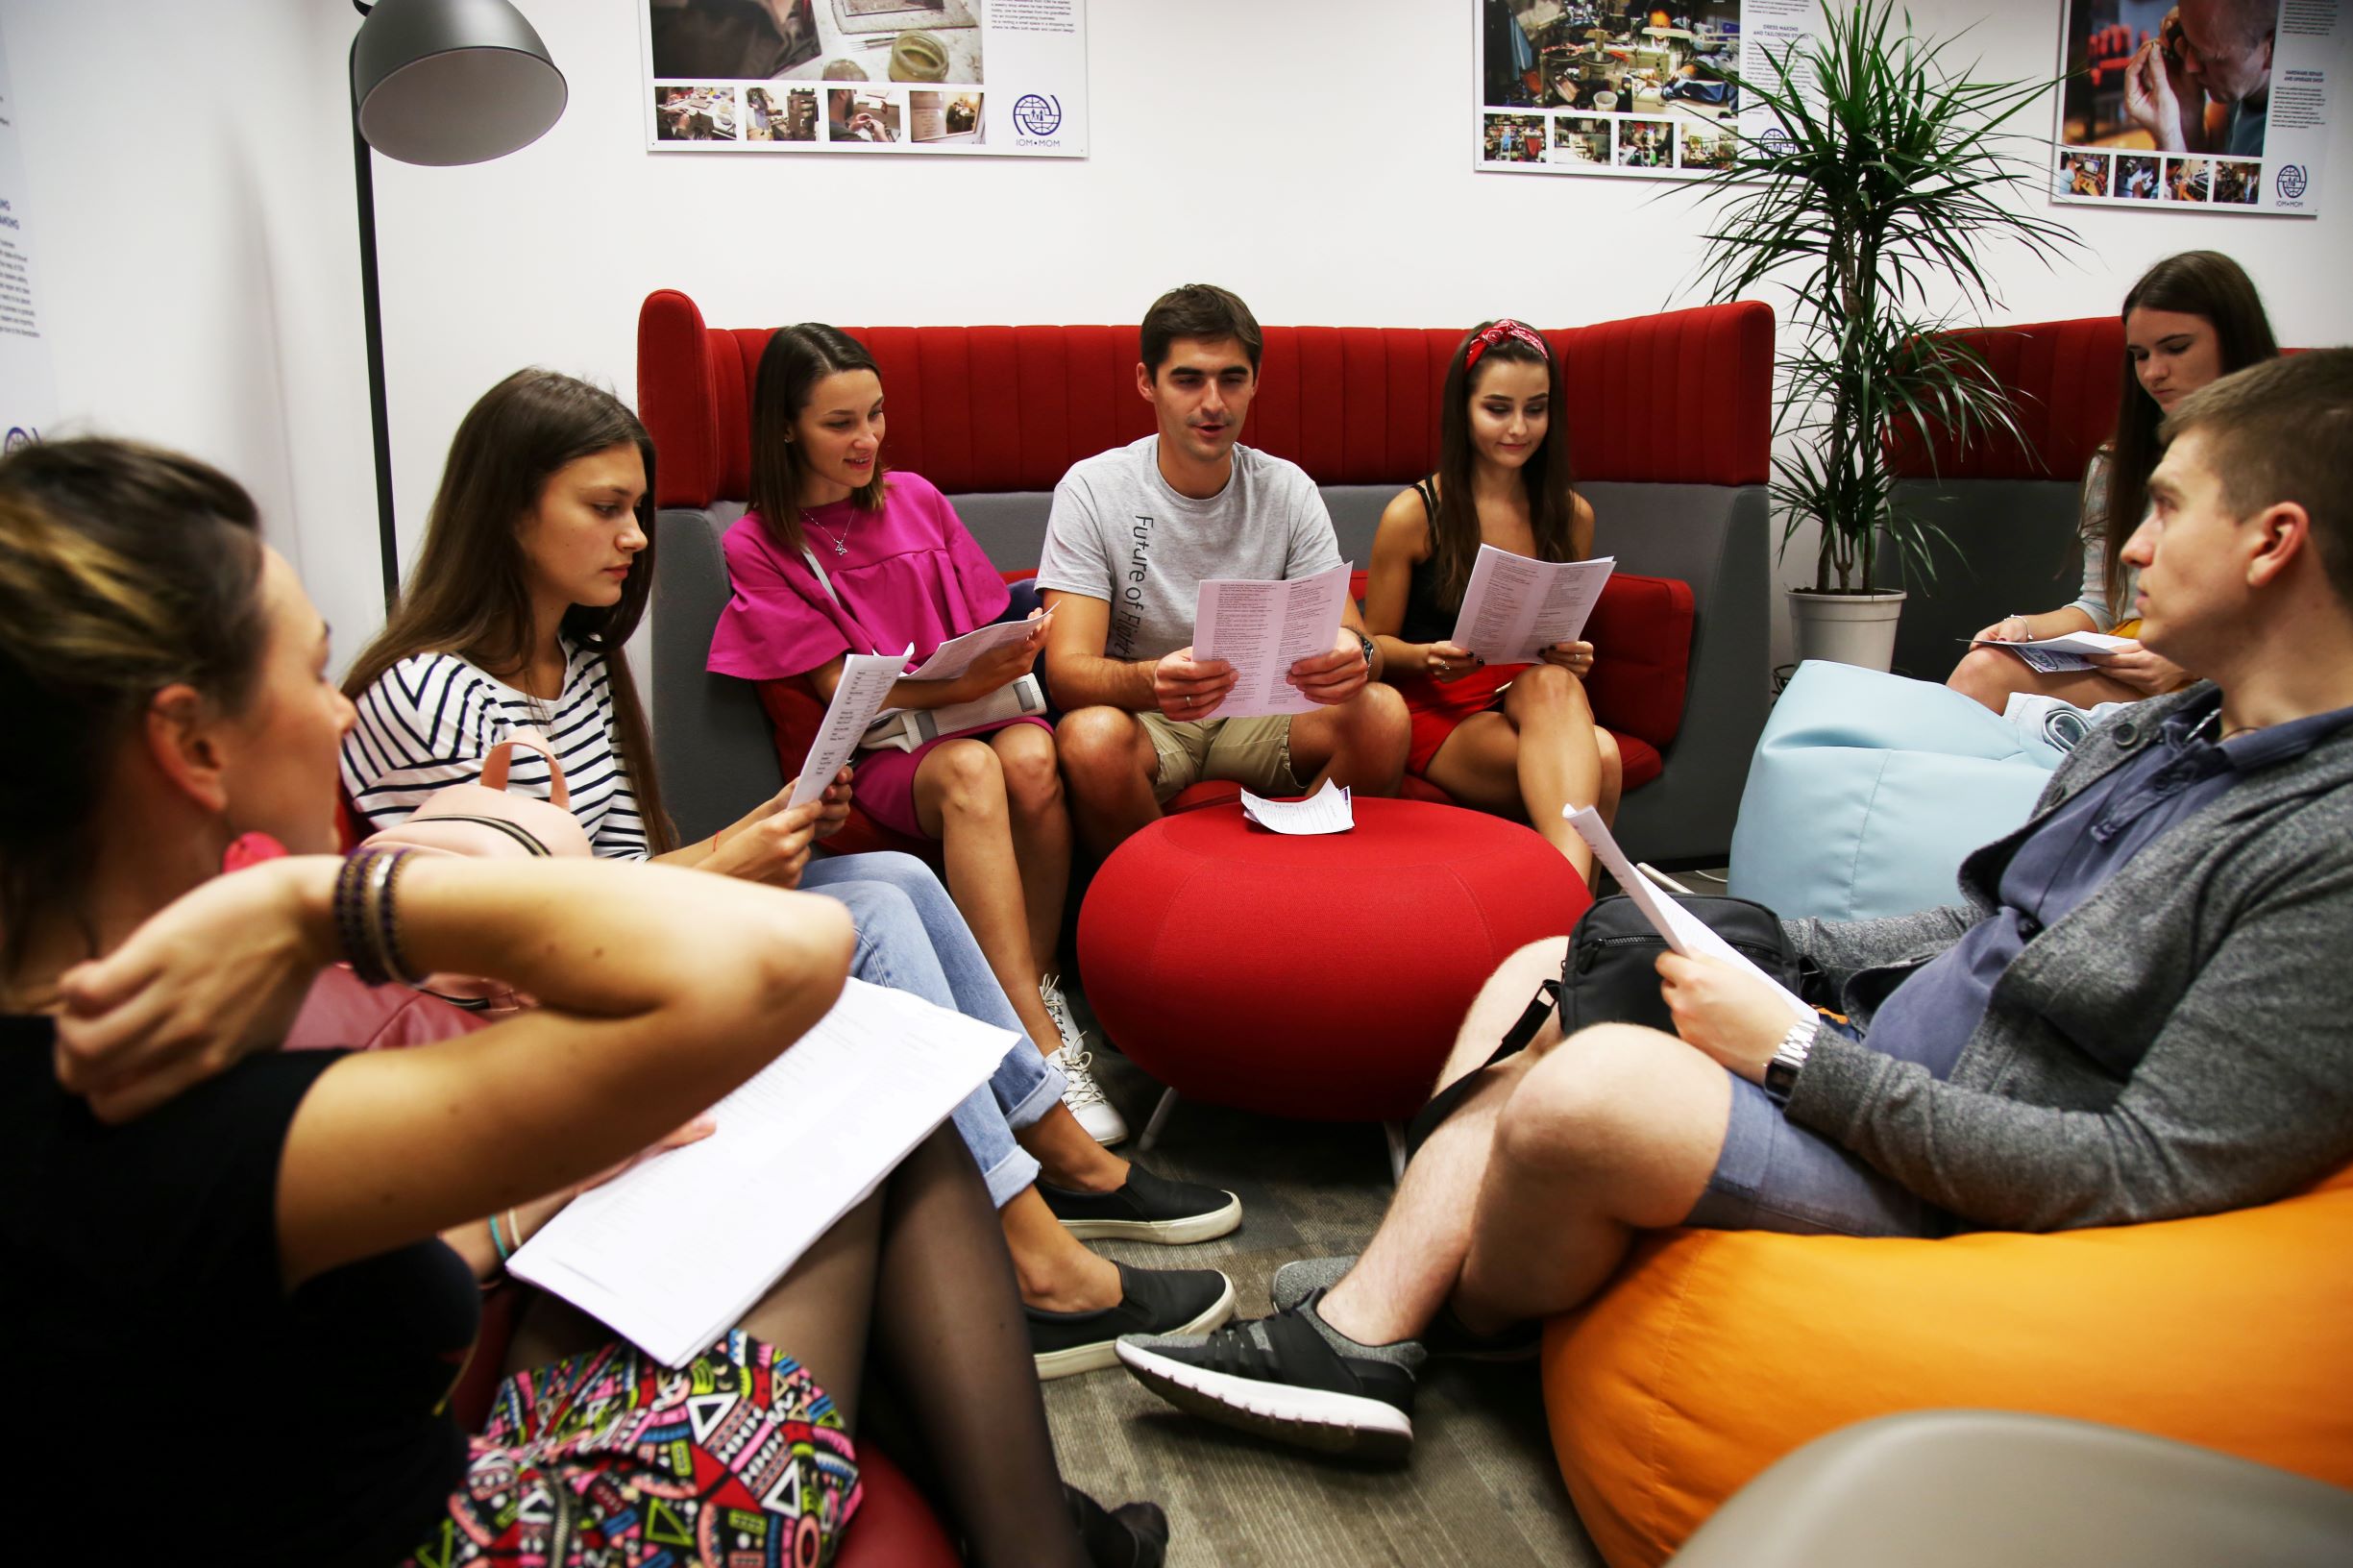 Photo of youth sitting on bean bags reading some papers in a discussion group